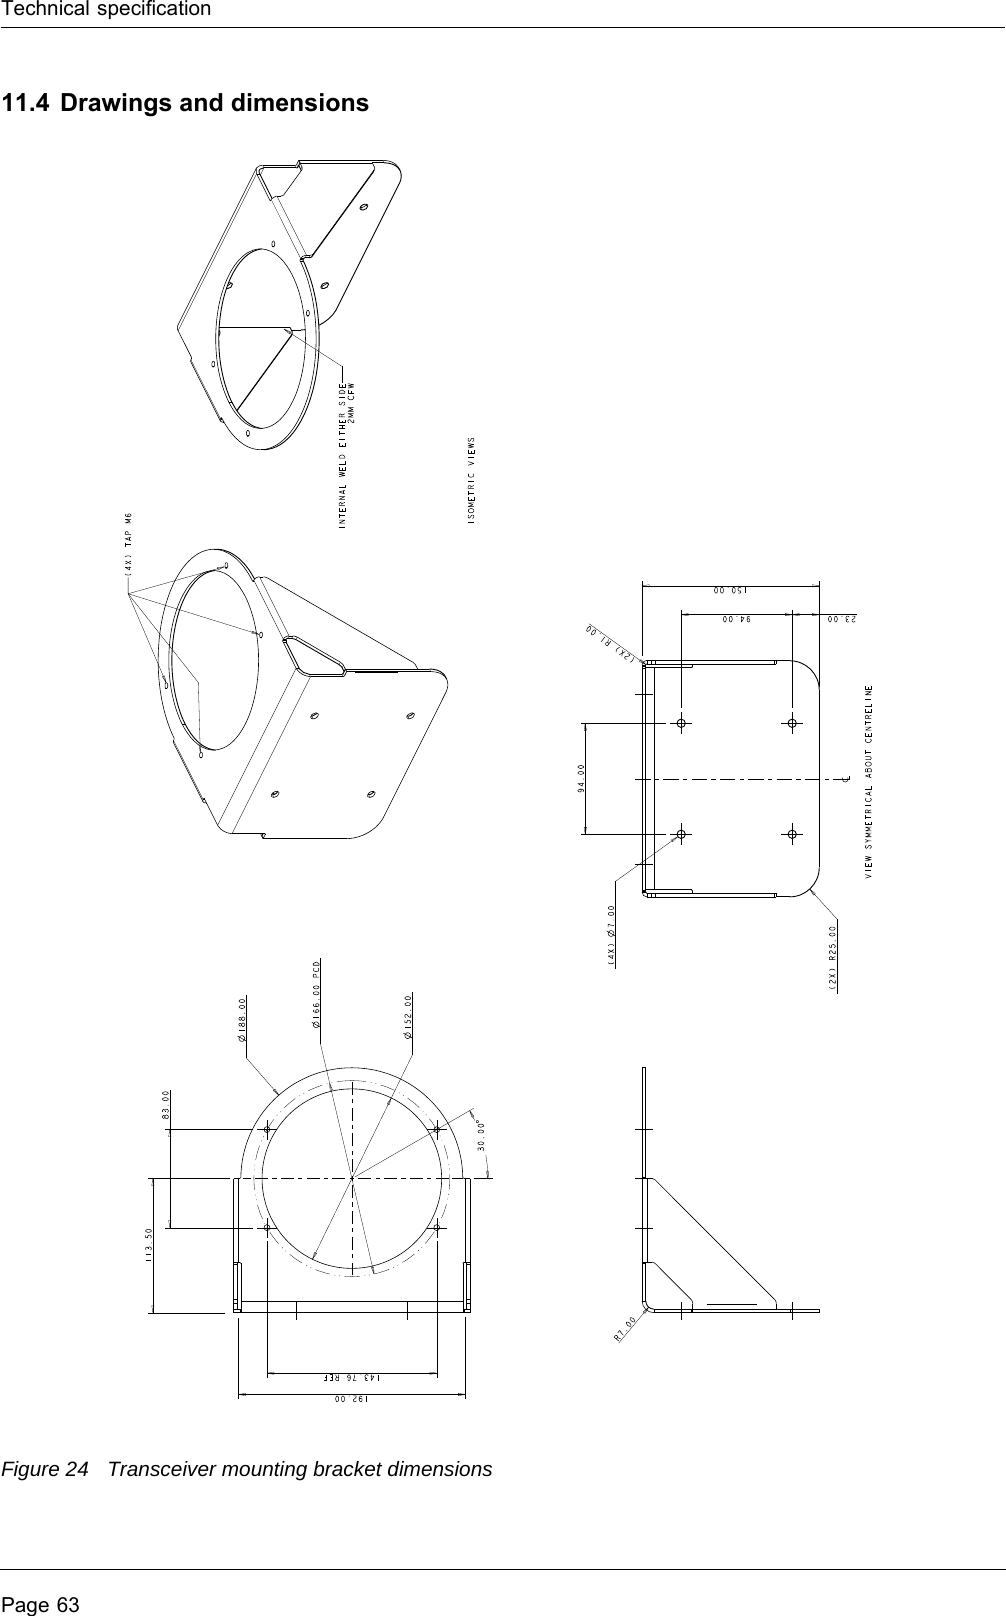 Technical specificationPage 6311.4 Drawings and dimensionsFigure 24 Transceiver mounting bracket dimensions